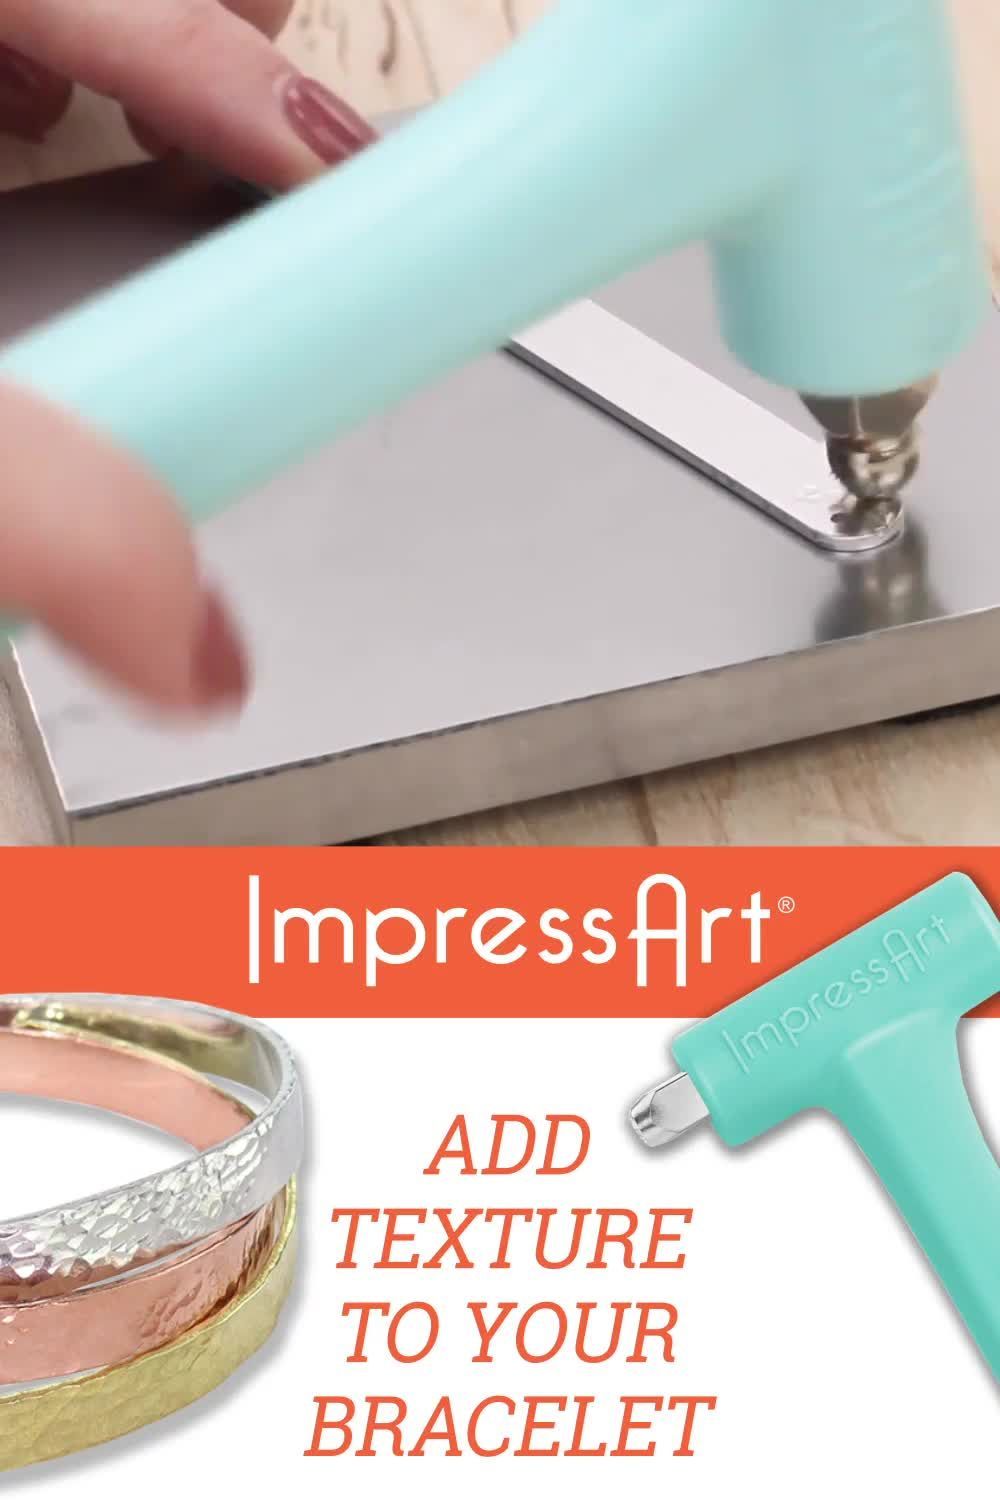 Make textured jewelry crafts in 20 minutes or less! - Make textured jewelry crafts in 20 minutes or less! -   15 diy Videos easy ideas